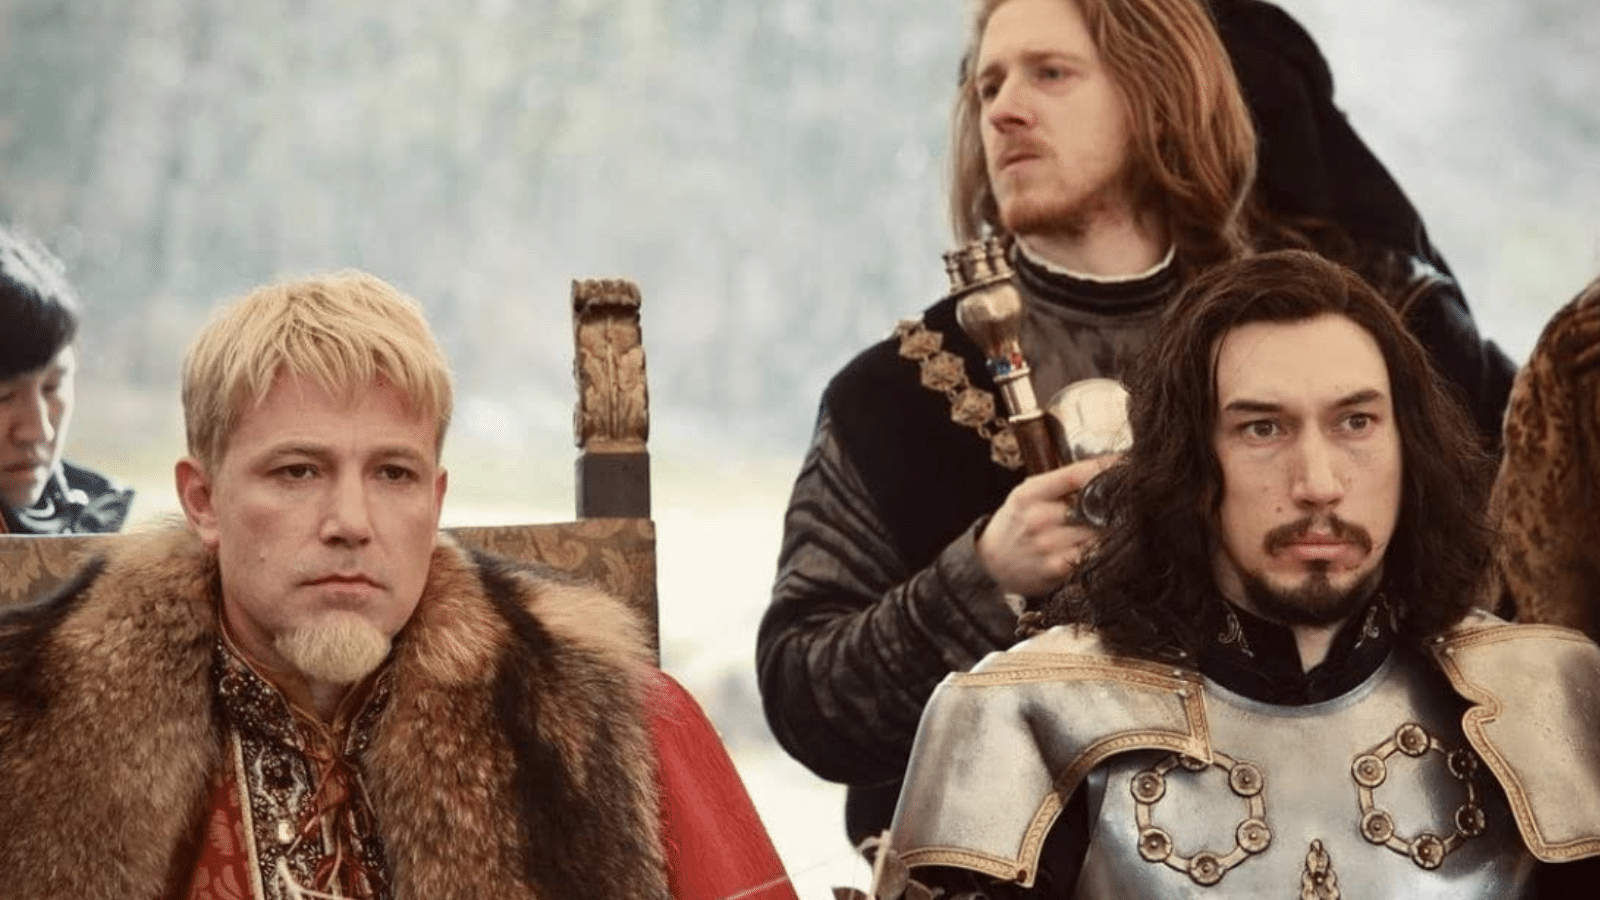 <p>Accused of a heinous crime by his friend’s wife (Jodie Comer), a squire (Adam Driver) is forced to battle the knight (Matt Damon) he once apprenticed for in what would later become known as the last judicial duel in French history.</p><p>Touching upon its historical source material in a wholly unconventional way, <em>The Last Duel</em> presents its central storyline from three different points of view, all told in succession (think of a medieval European version of <em>Rashomon</em>). Director Ridley Scott’s most impressive film in years, The Last Duel raises some poignant questions about truth, perspective, and friendship, boasting fine performances from its three principal leads.</p>